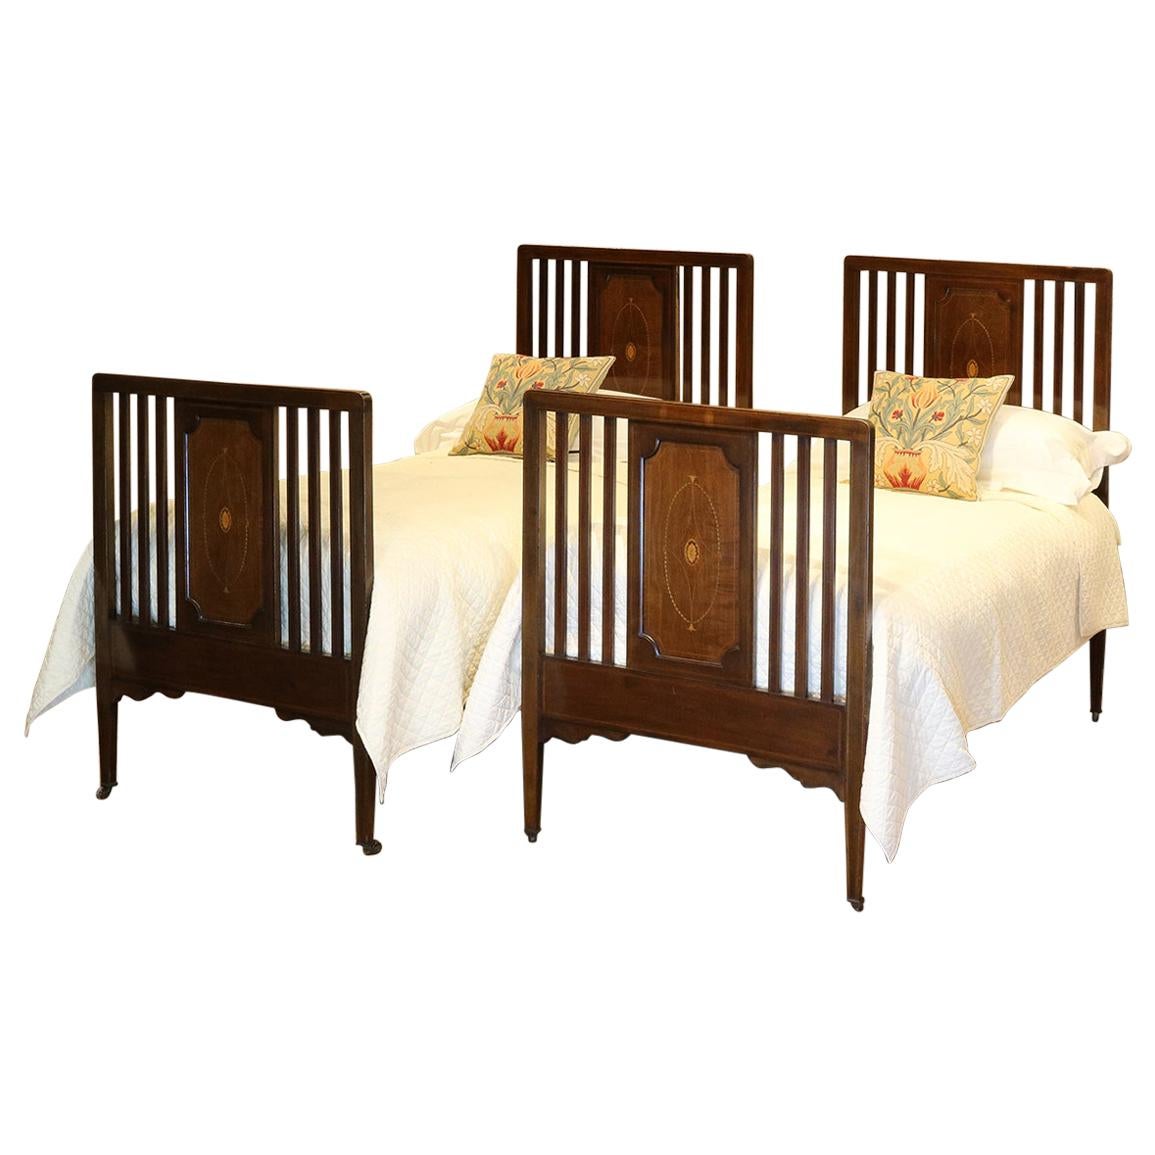 Matching Pair of Beds WP24